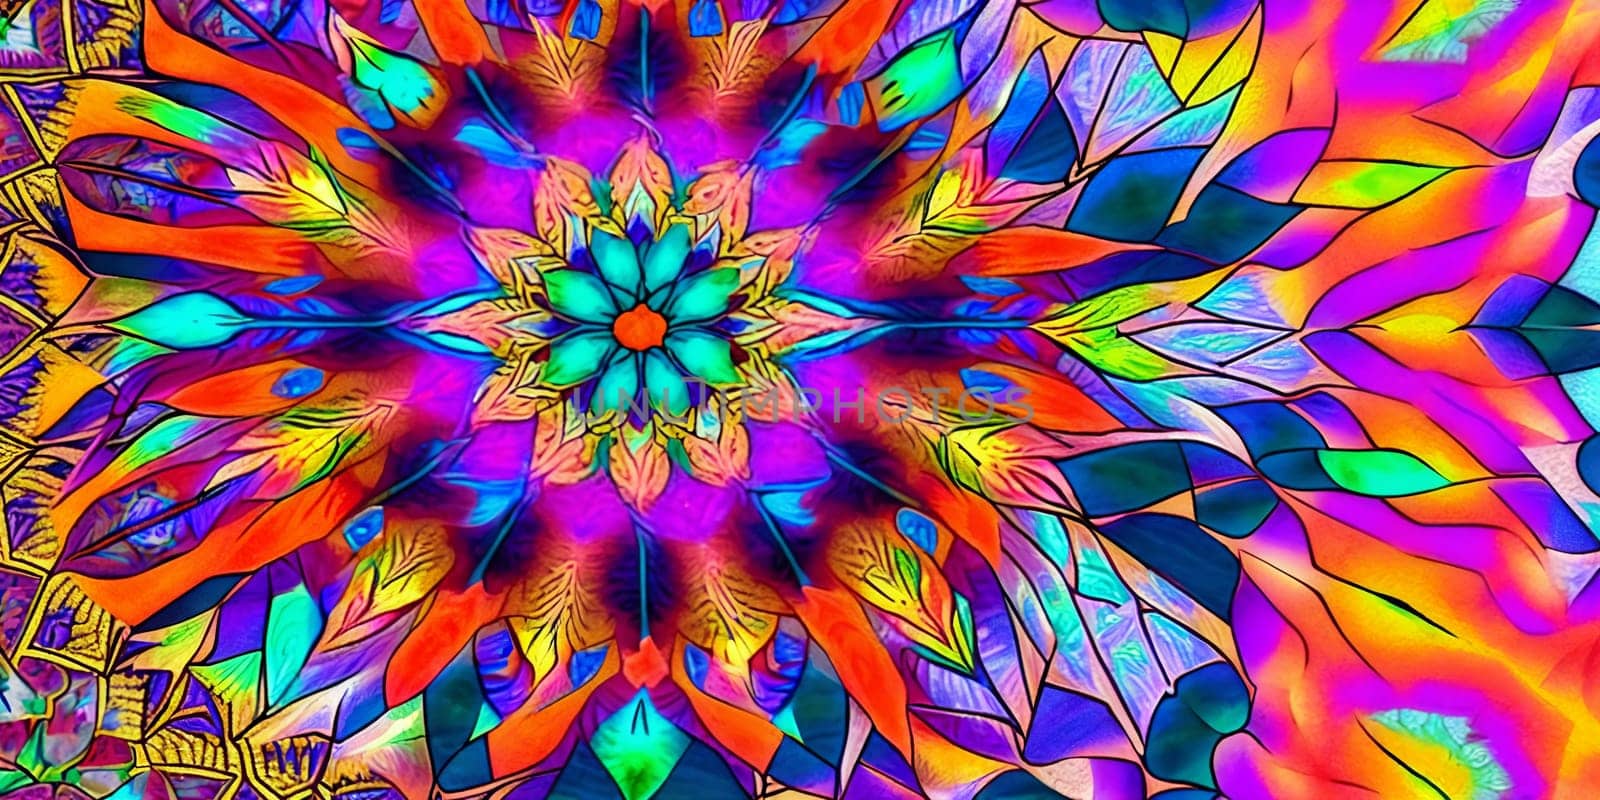 An intricate mosaic mandala pattern with vibrant stained glass colors by GoodOlga